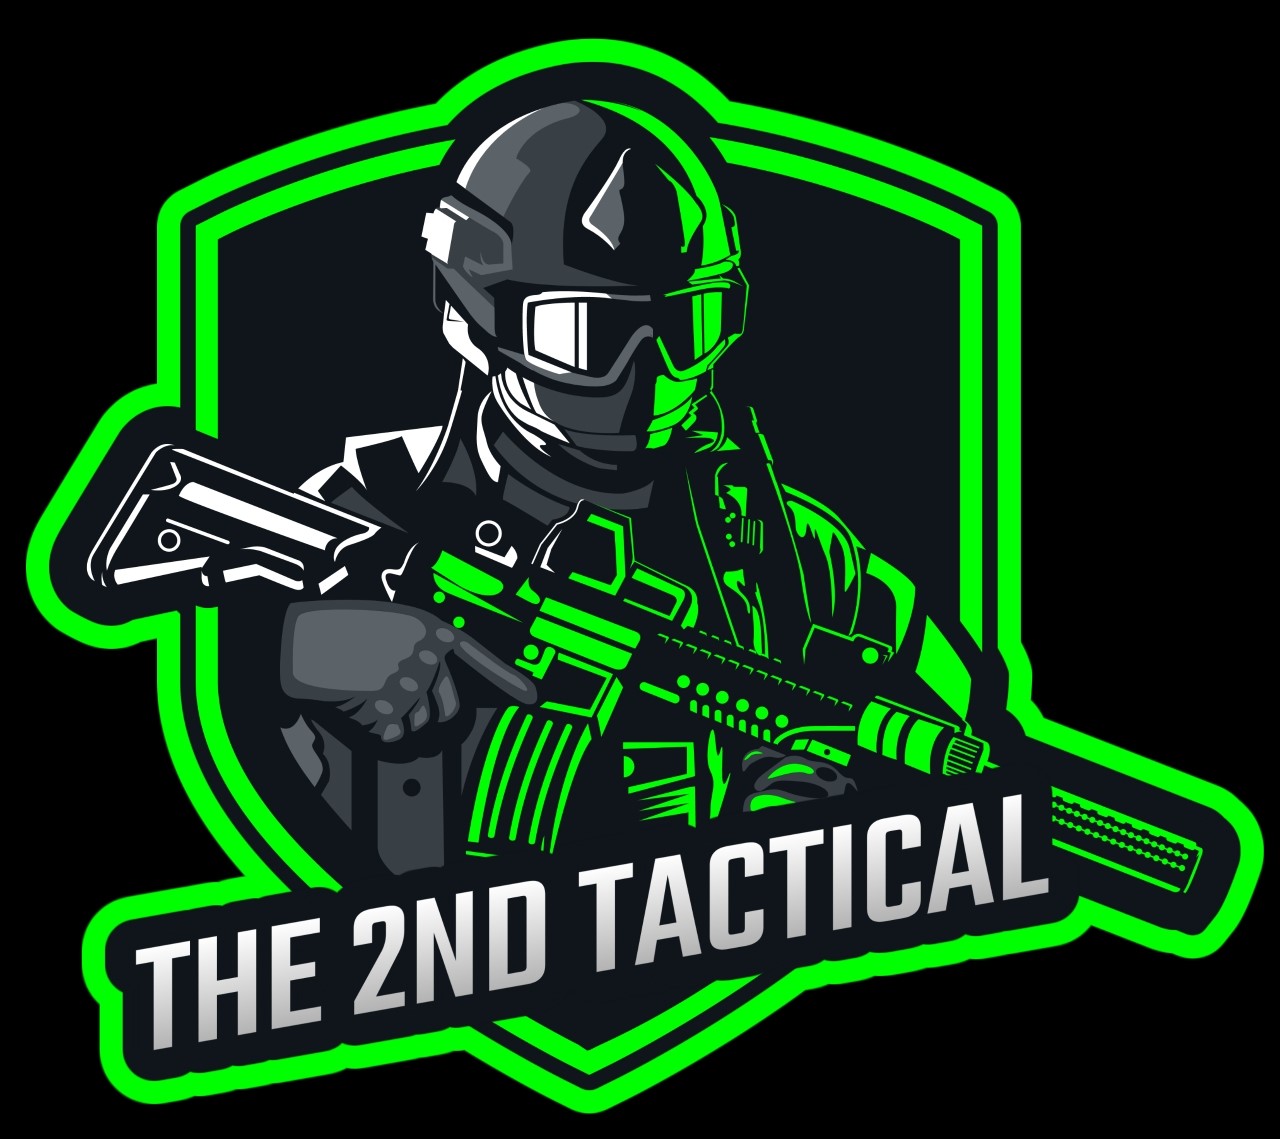 The 2nd Tactical